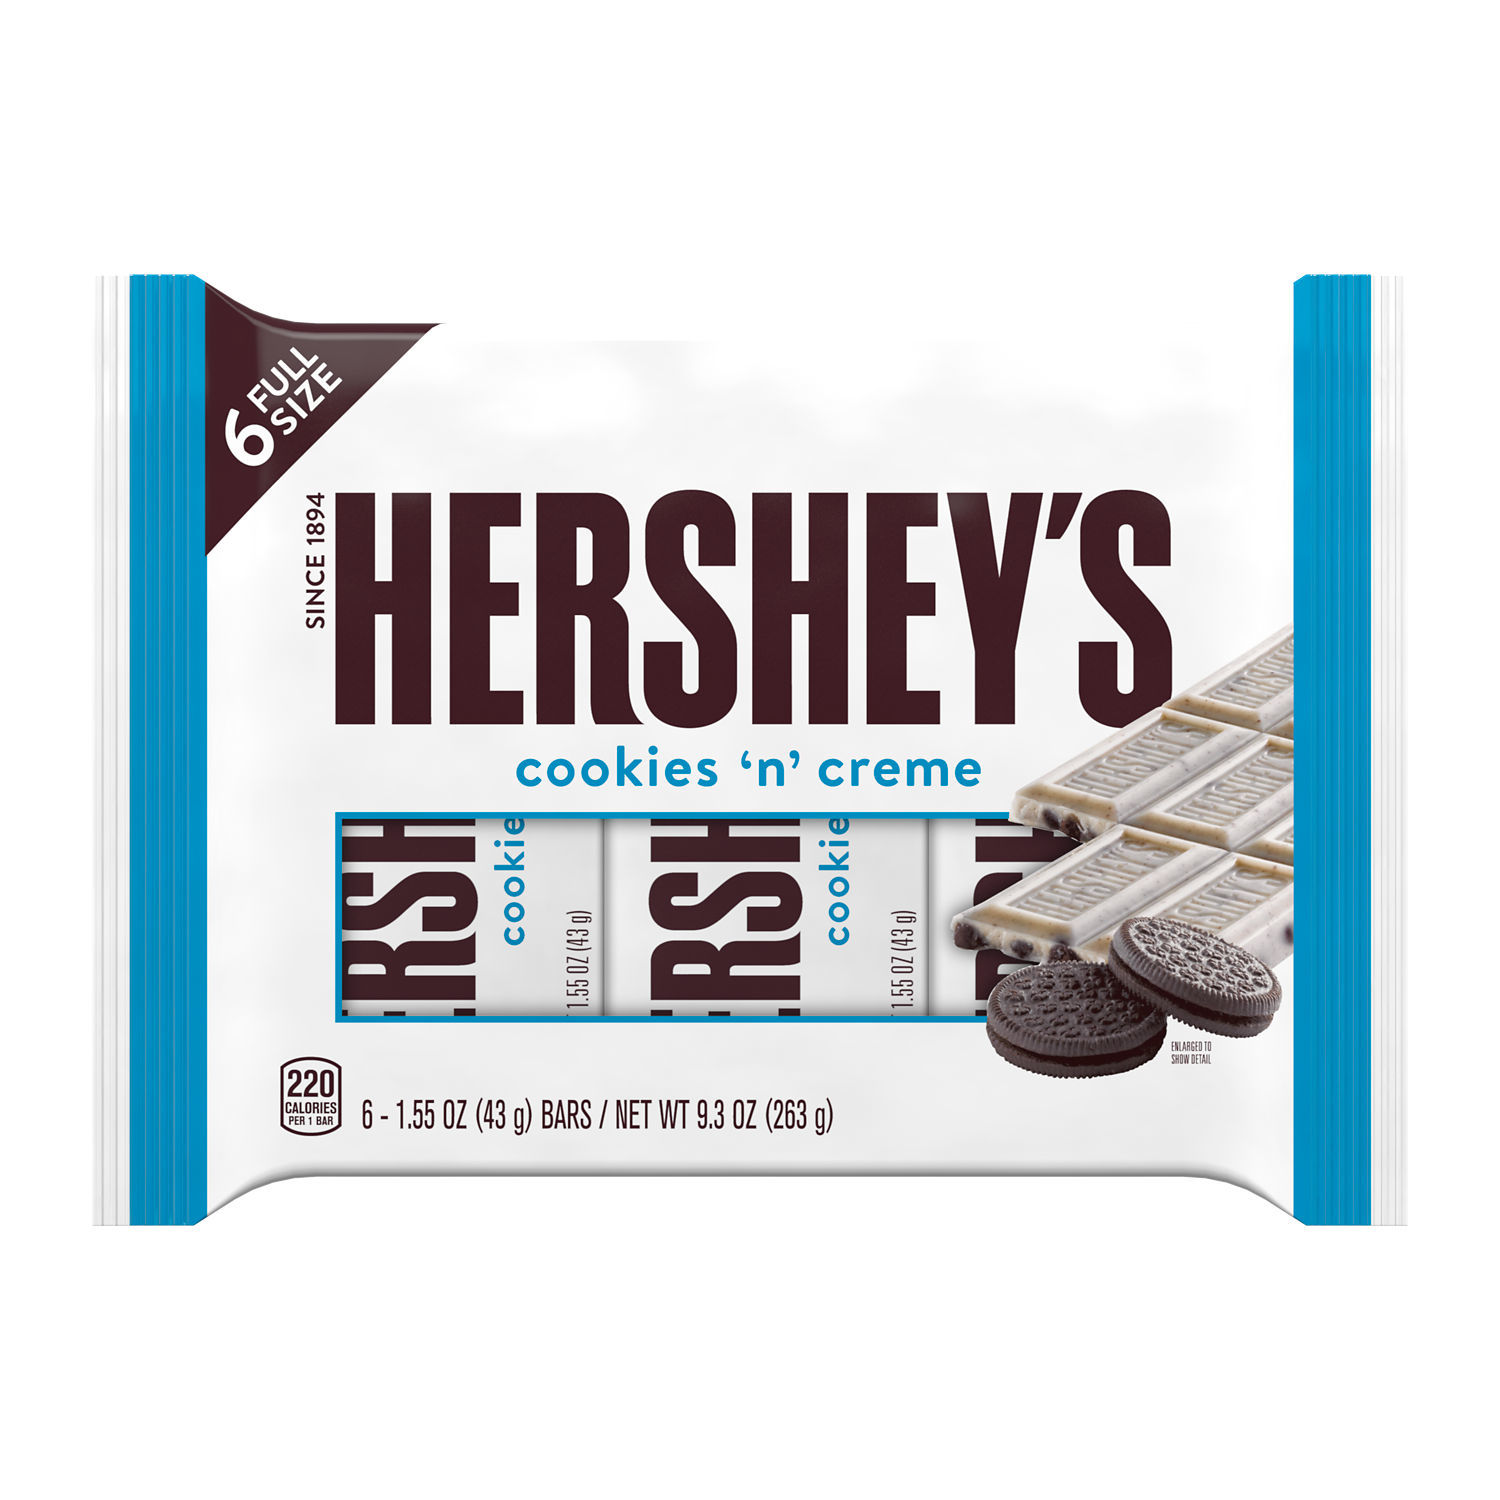 Hershey's Cookies 'n' Creme Candy, Bars 1.55 oz, 6 Count - image 1 of 8